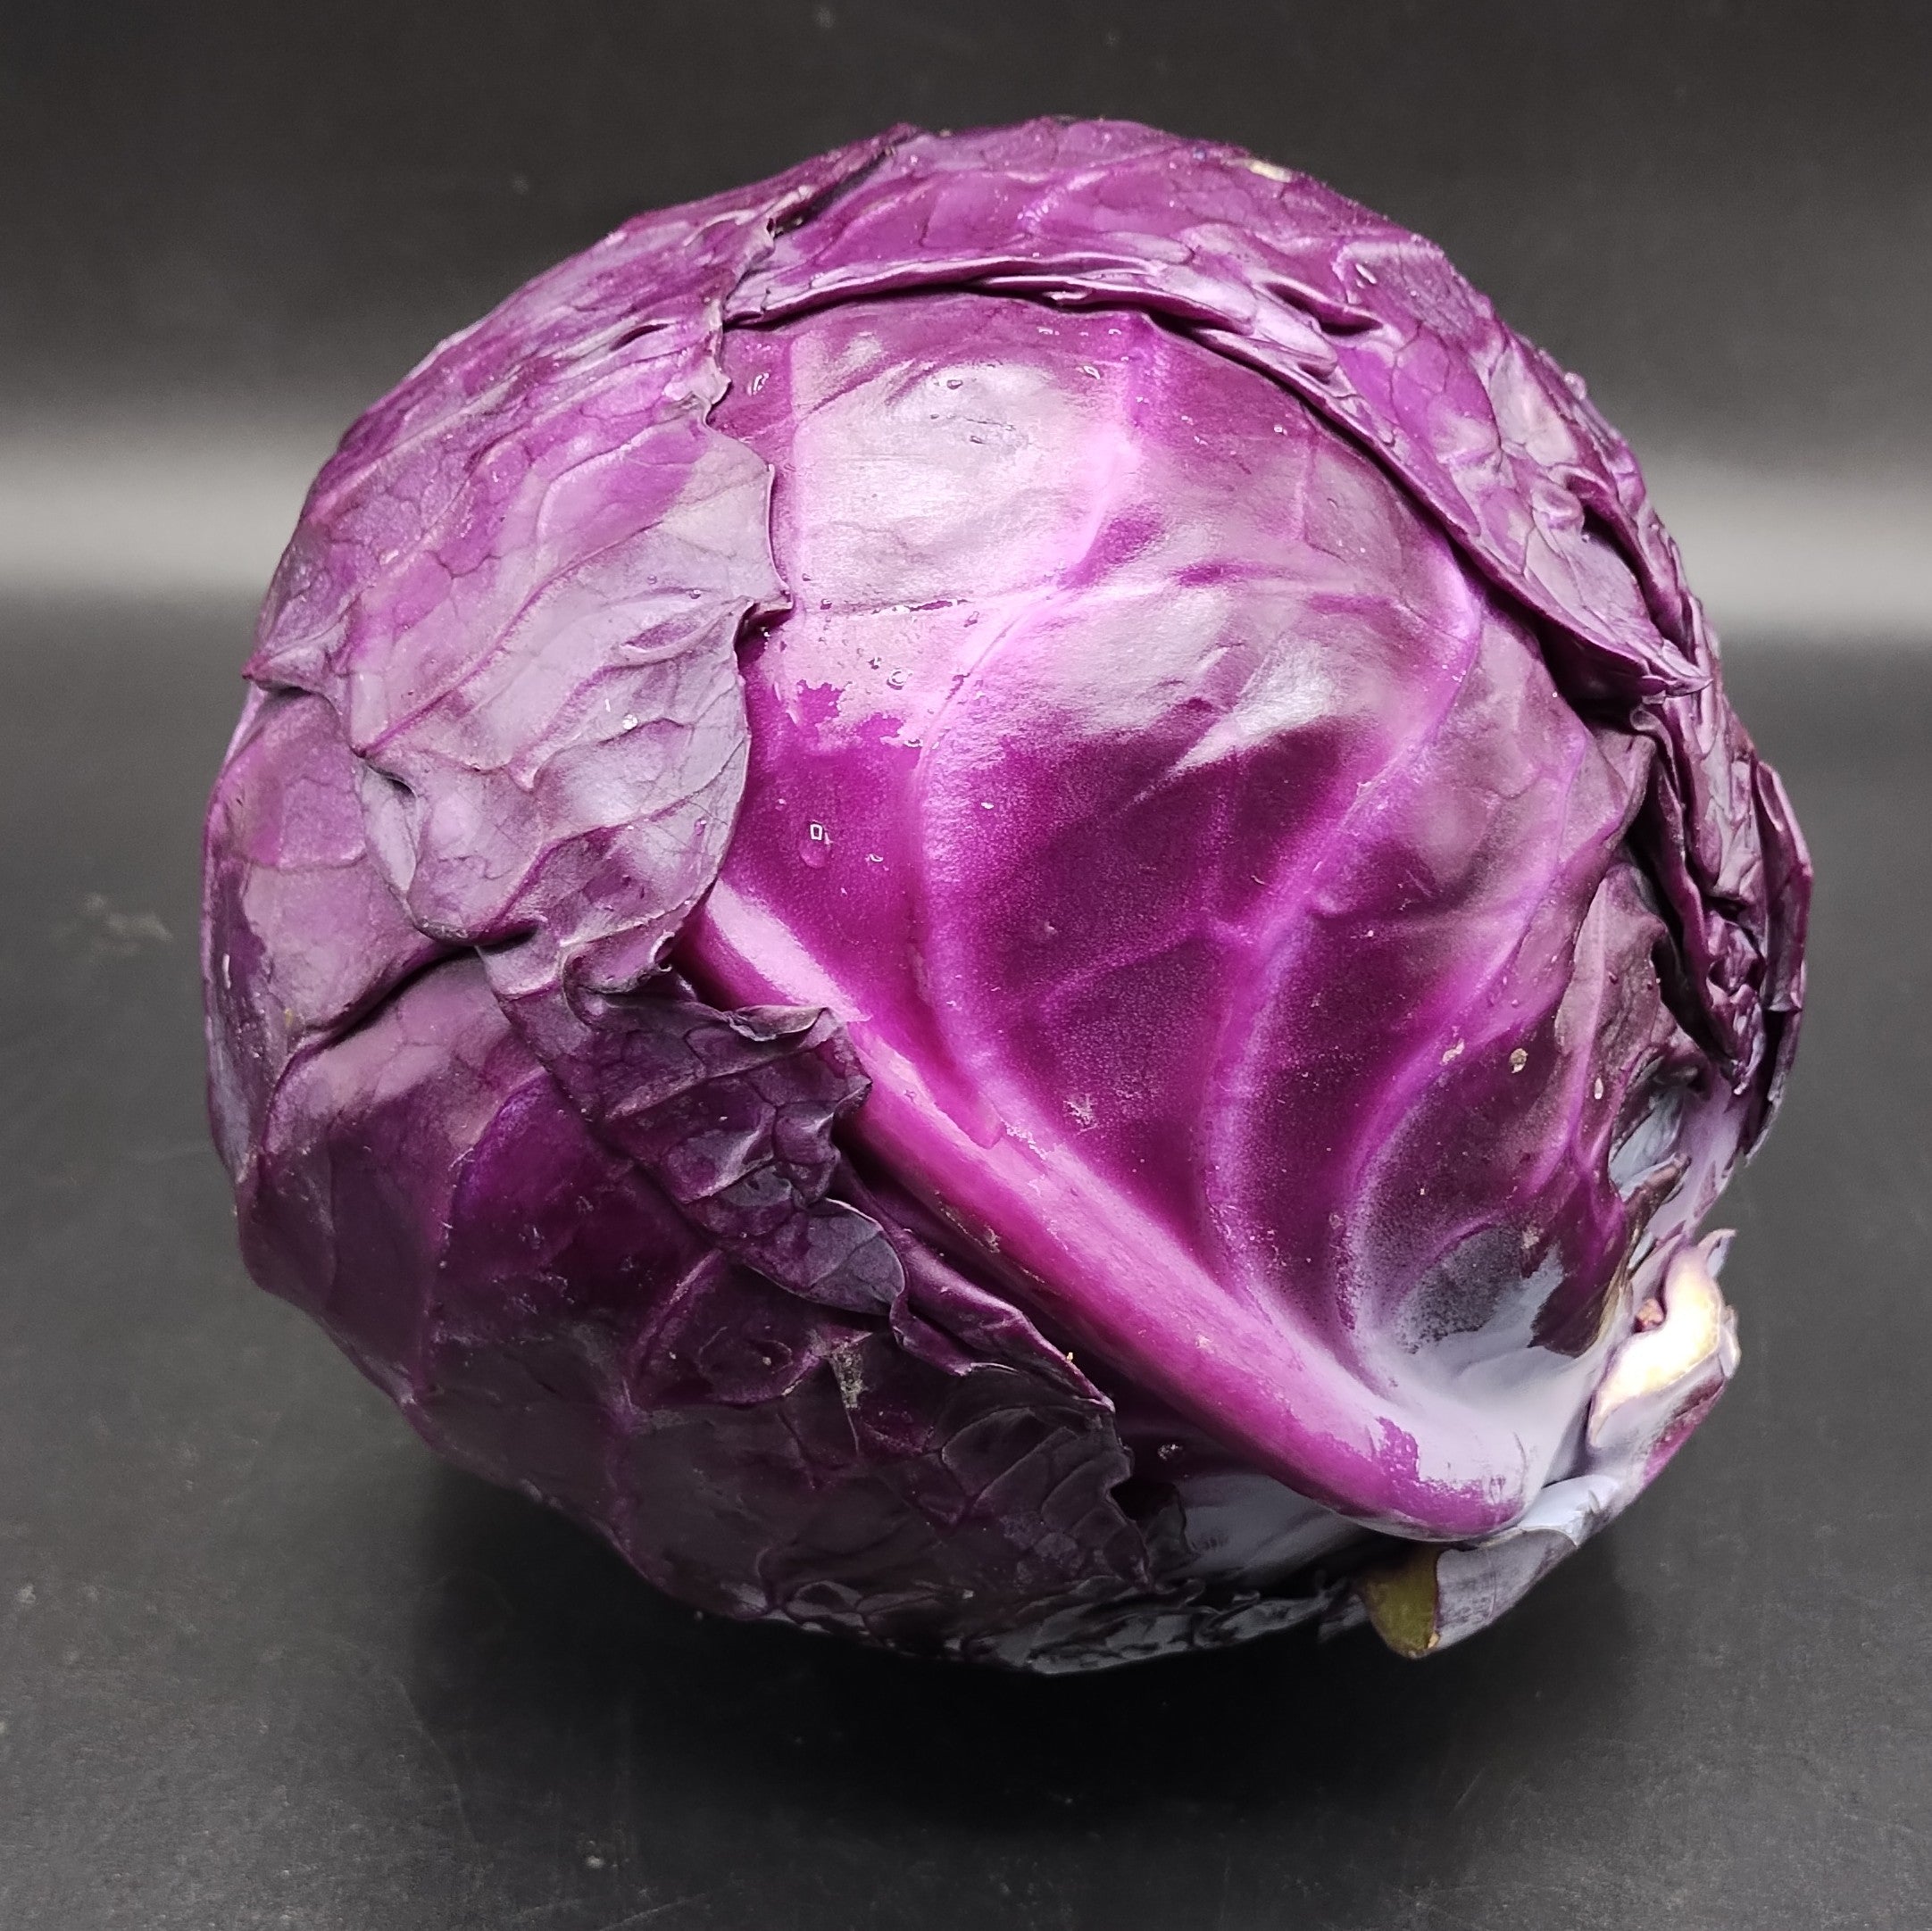 Cabbage, Red Organic (x2 small)